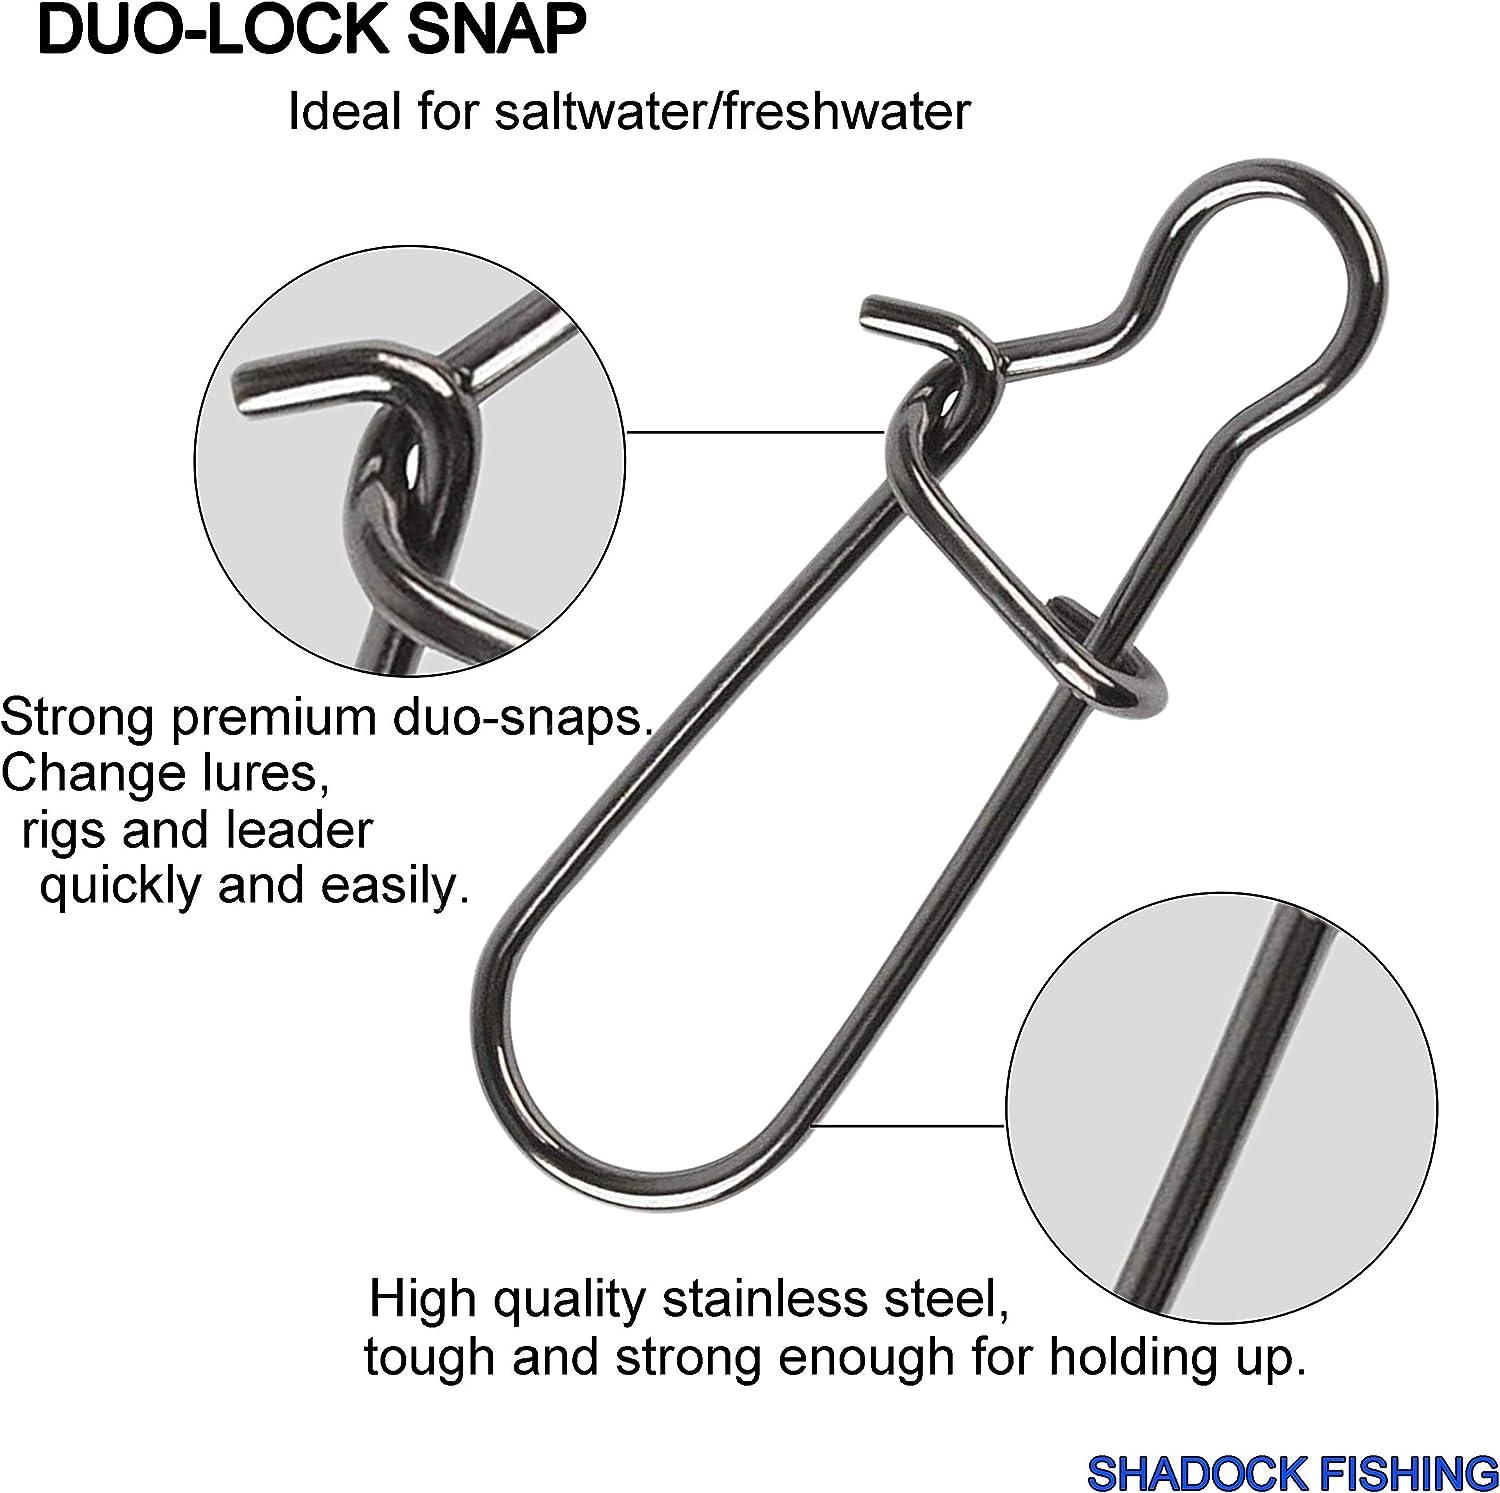 100 Pack Duo Lock Snaps Size 0-8 Black Nice Snap Swivel Solid Rings Stainless  Steel USA Fishing Tackle Kit - Test: 26LB-220LB 0#-26LB-100PCS